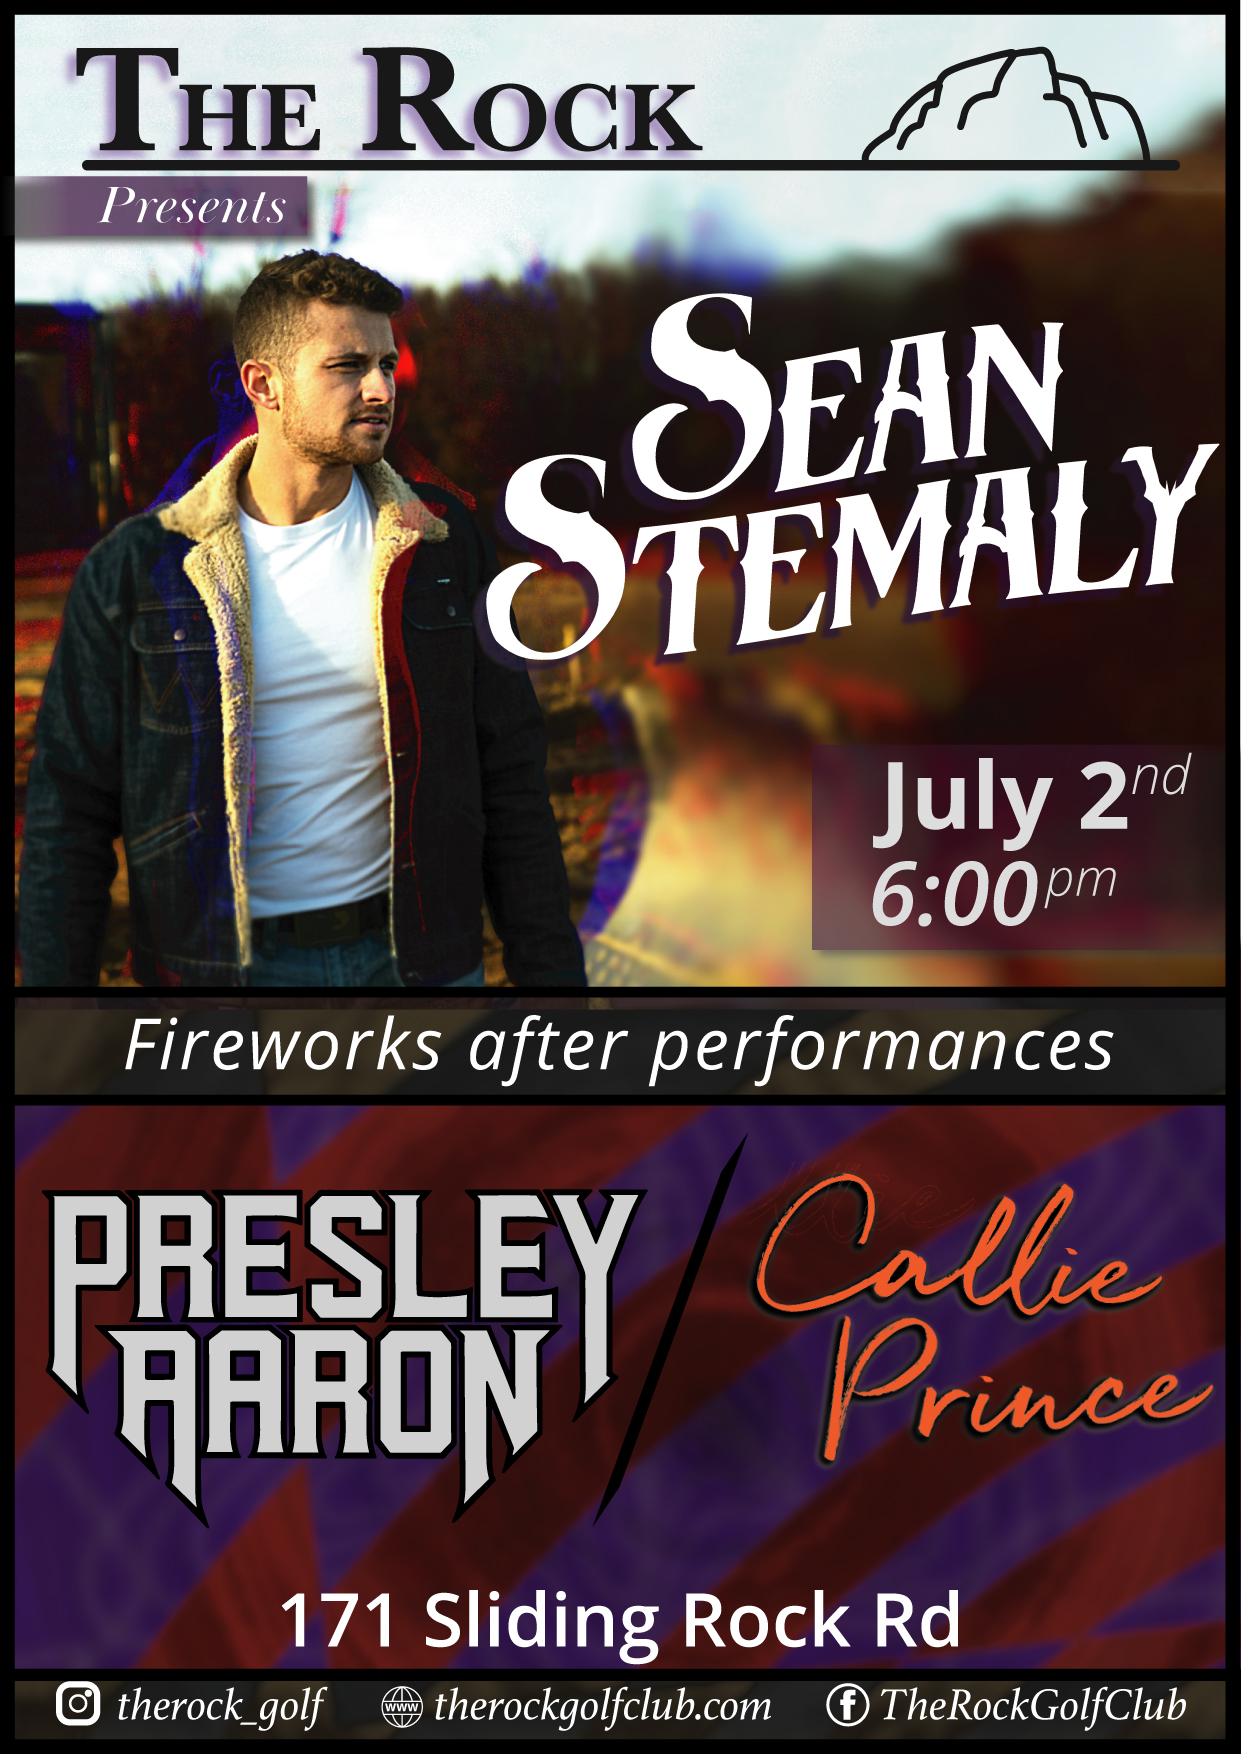 Poster for the July 2nd Event at the rock golf course. Sean Stemaly's photo with his logo overlayed is on top. On the bottom are presley aaron's and callie prince's logos